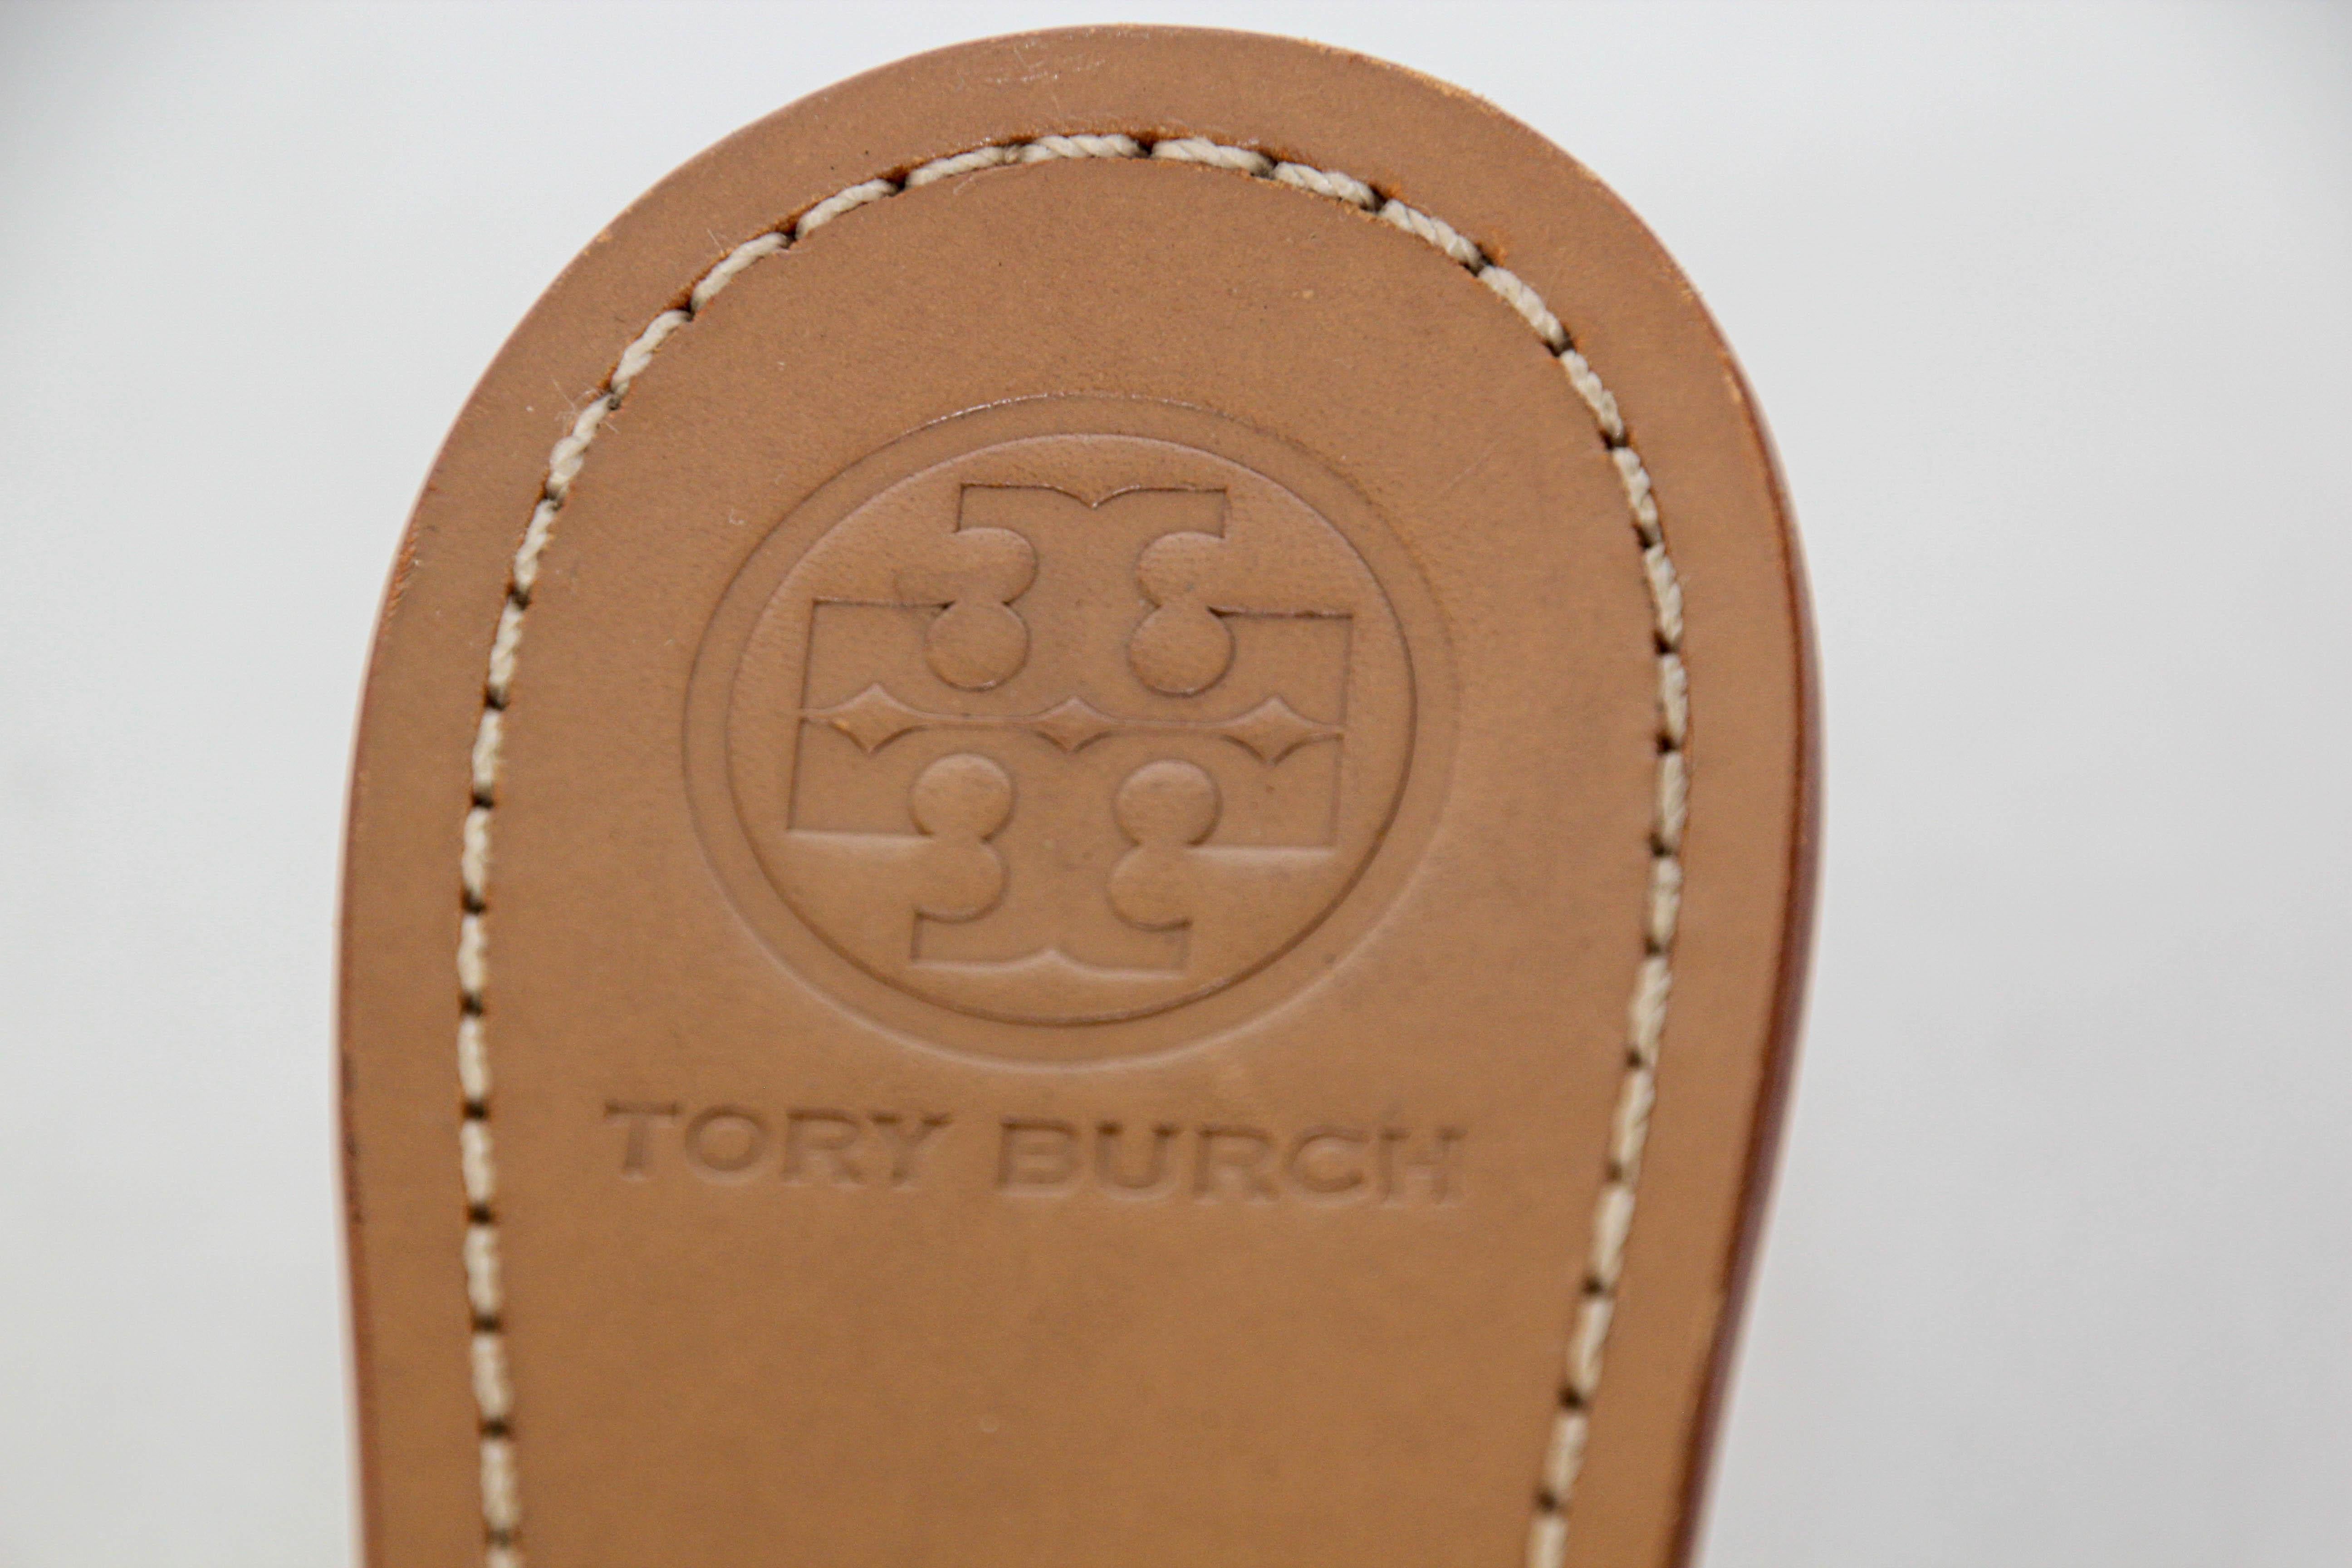 Tory Burch Patent Leather Pink Sandals size 8 M For Sale 4